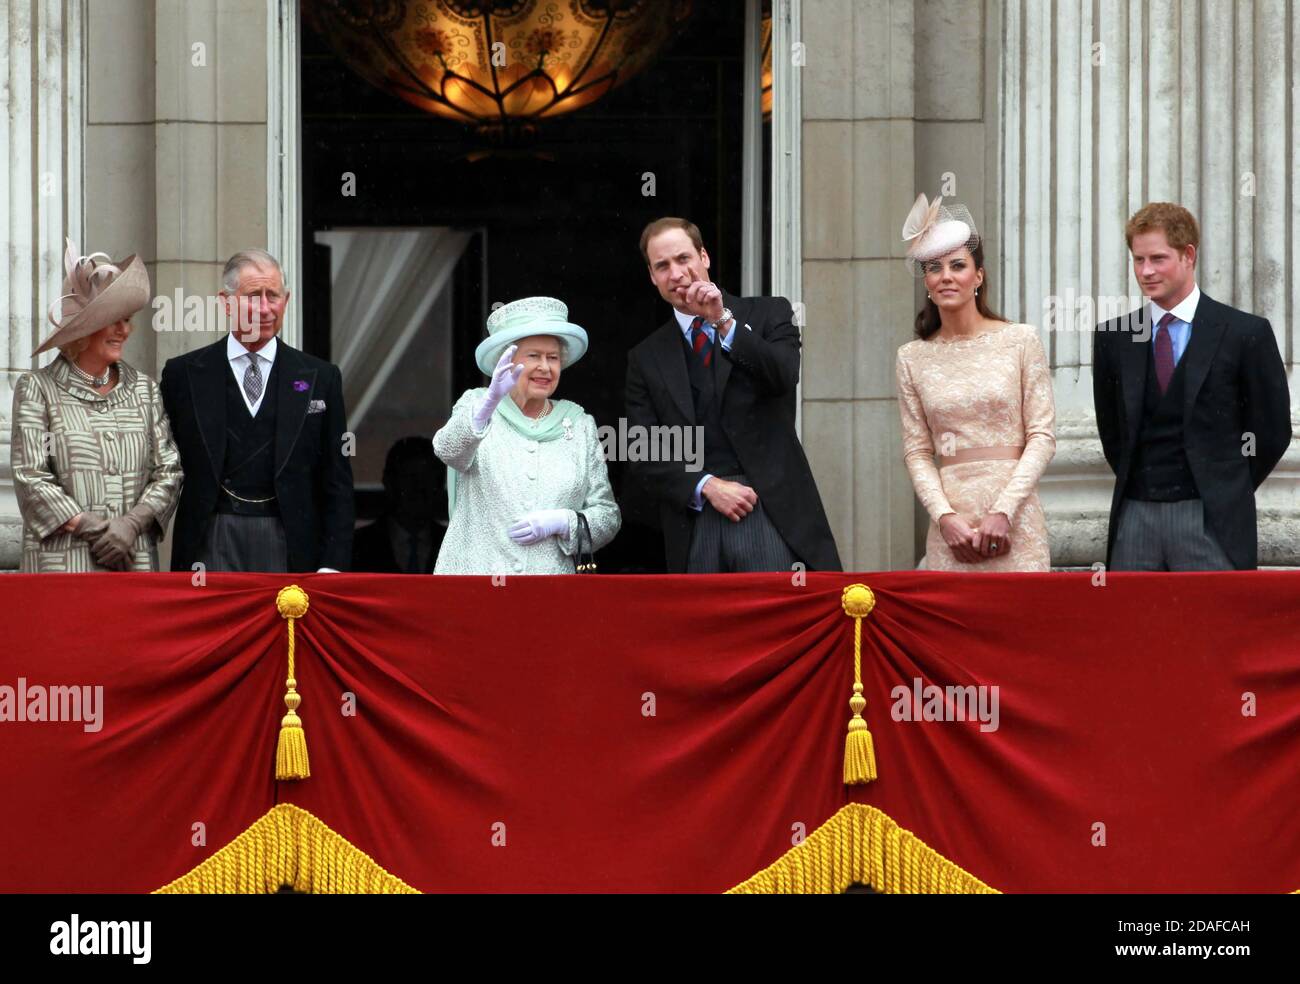 File photo dated 05/06/12 of (left to right) the Duchess of Cornwall, the Prince of Wales, Queen Elizabeth II, the Duke and Duchess of Cambridge and Prince Harry Queen appearing on the balcony of Buckingham Palace during the Diamond Jubilee celebrations. Stock Photo